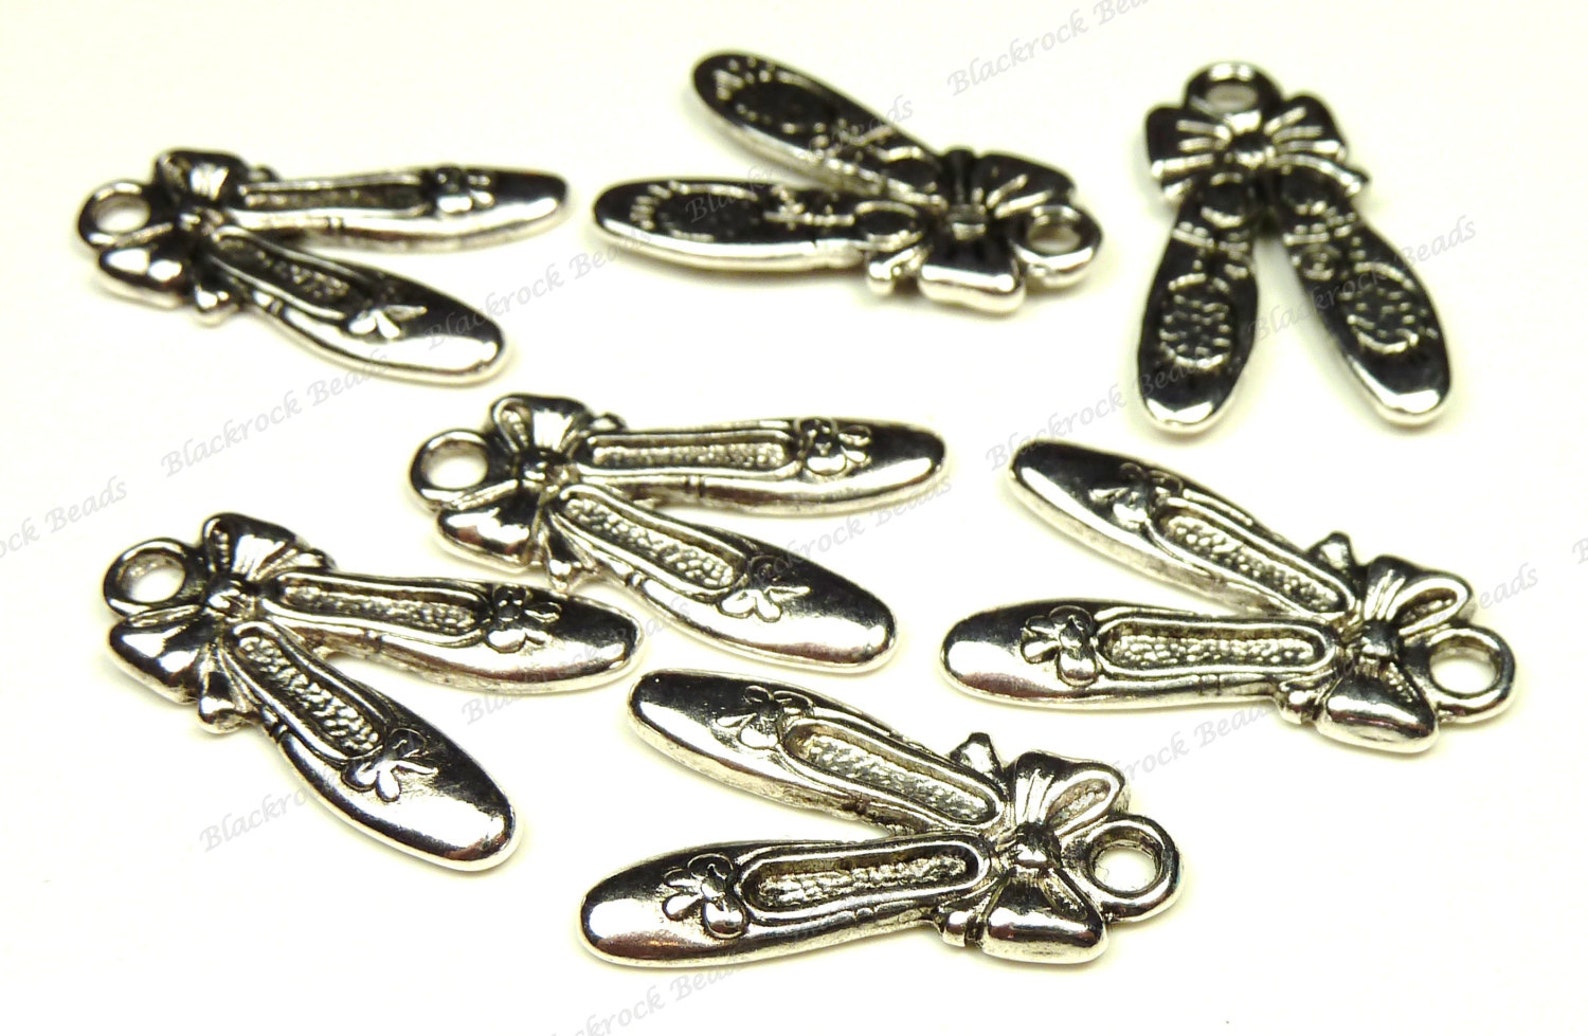 10 antique silver tone ballet shoe 21x12mm metal charms - findings, jewelry supplies, ballerina slippers - bt5